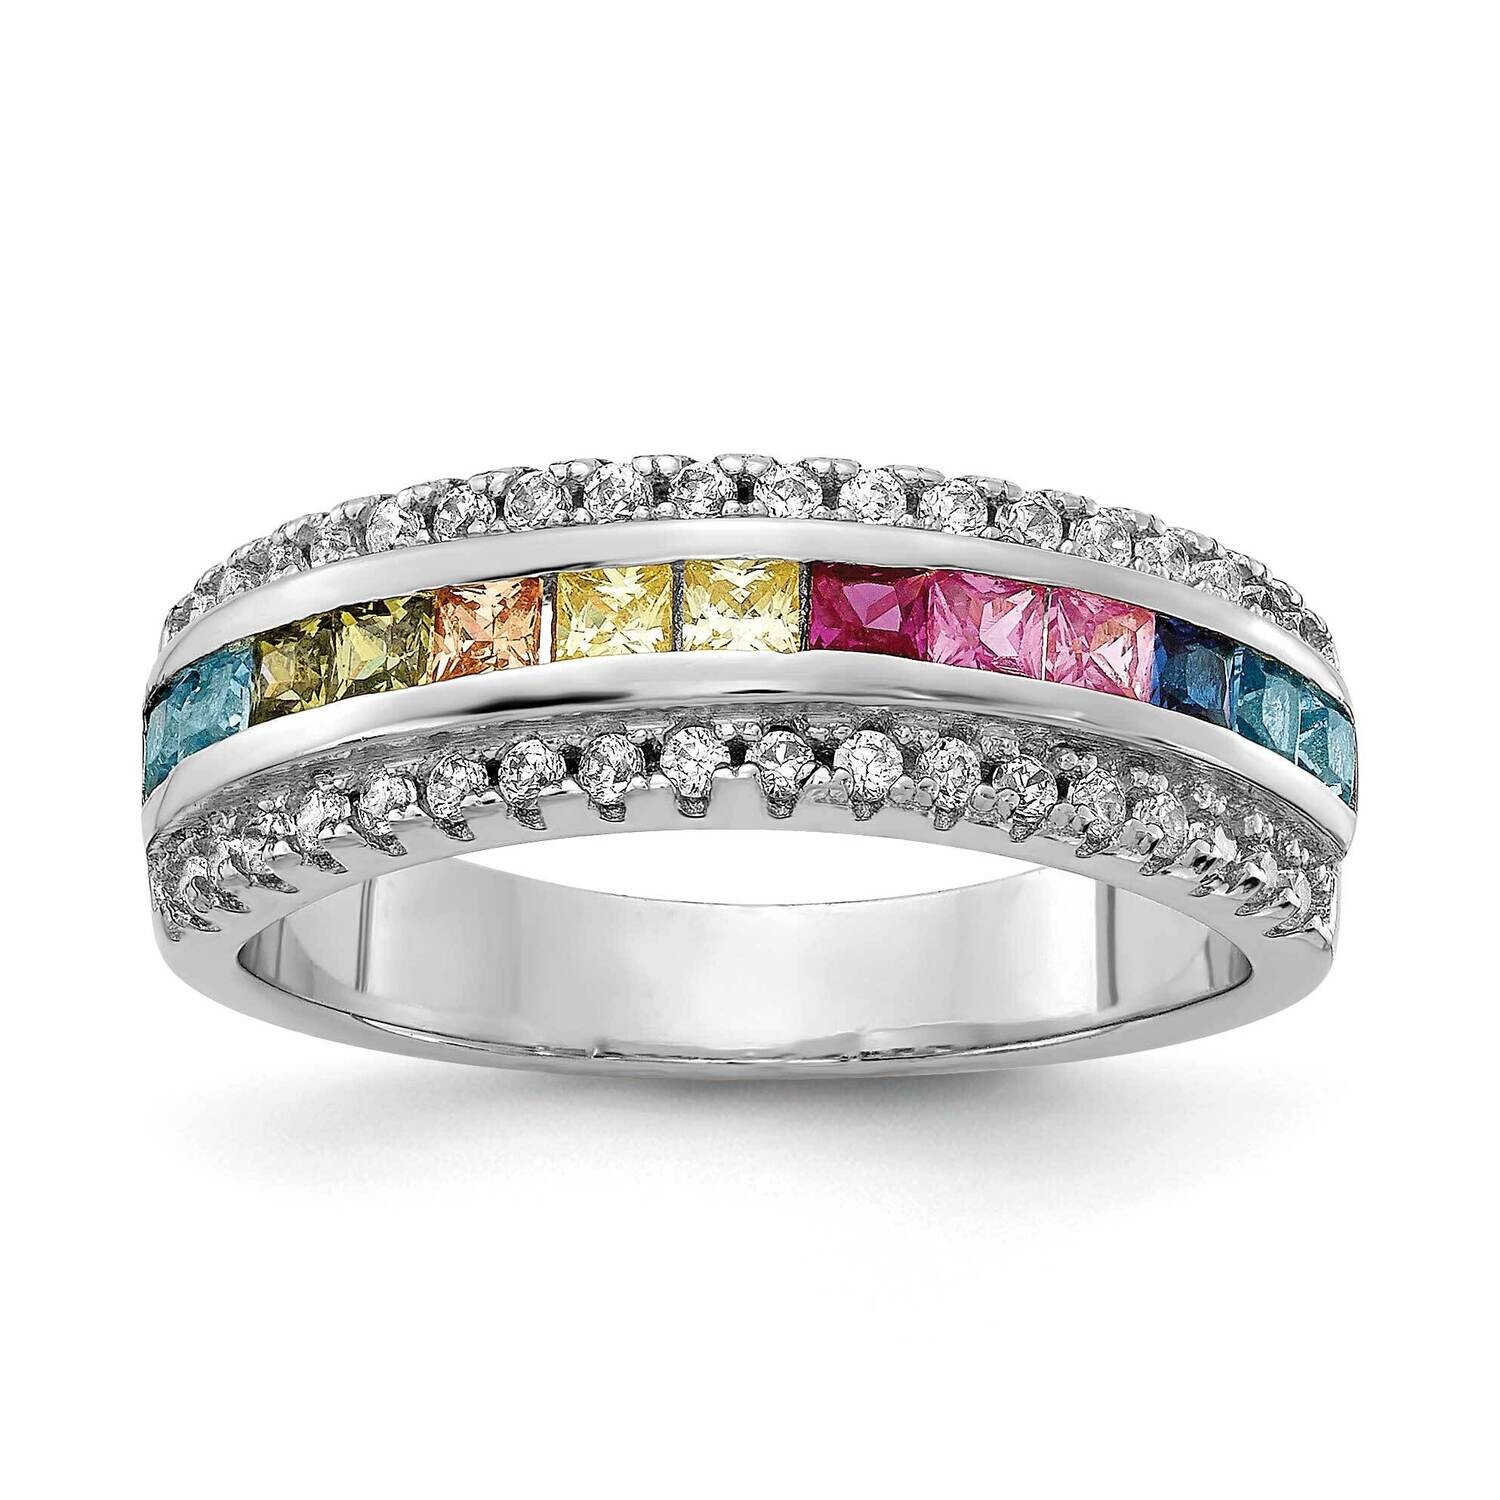 Prizma Channel-Set Colorful White CZ Ring Sterling Silver Rhodium-Plated QR7175